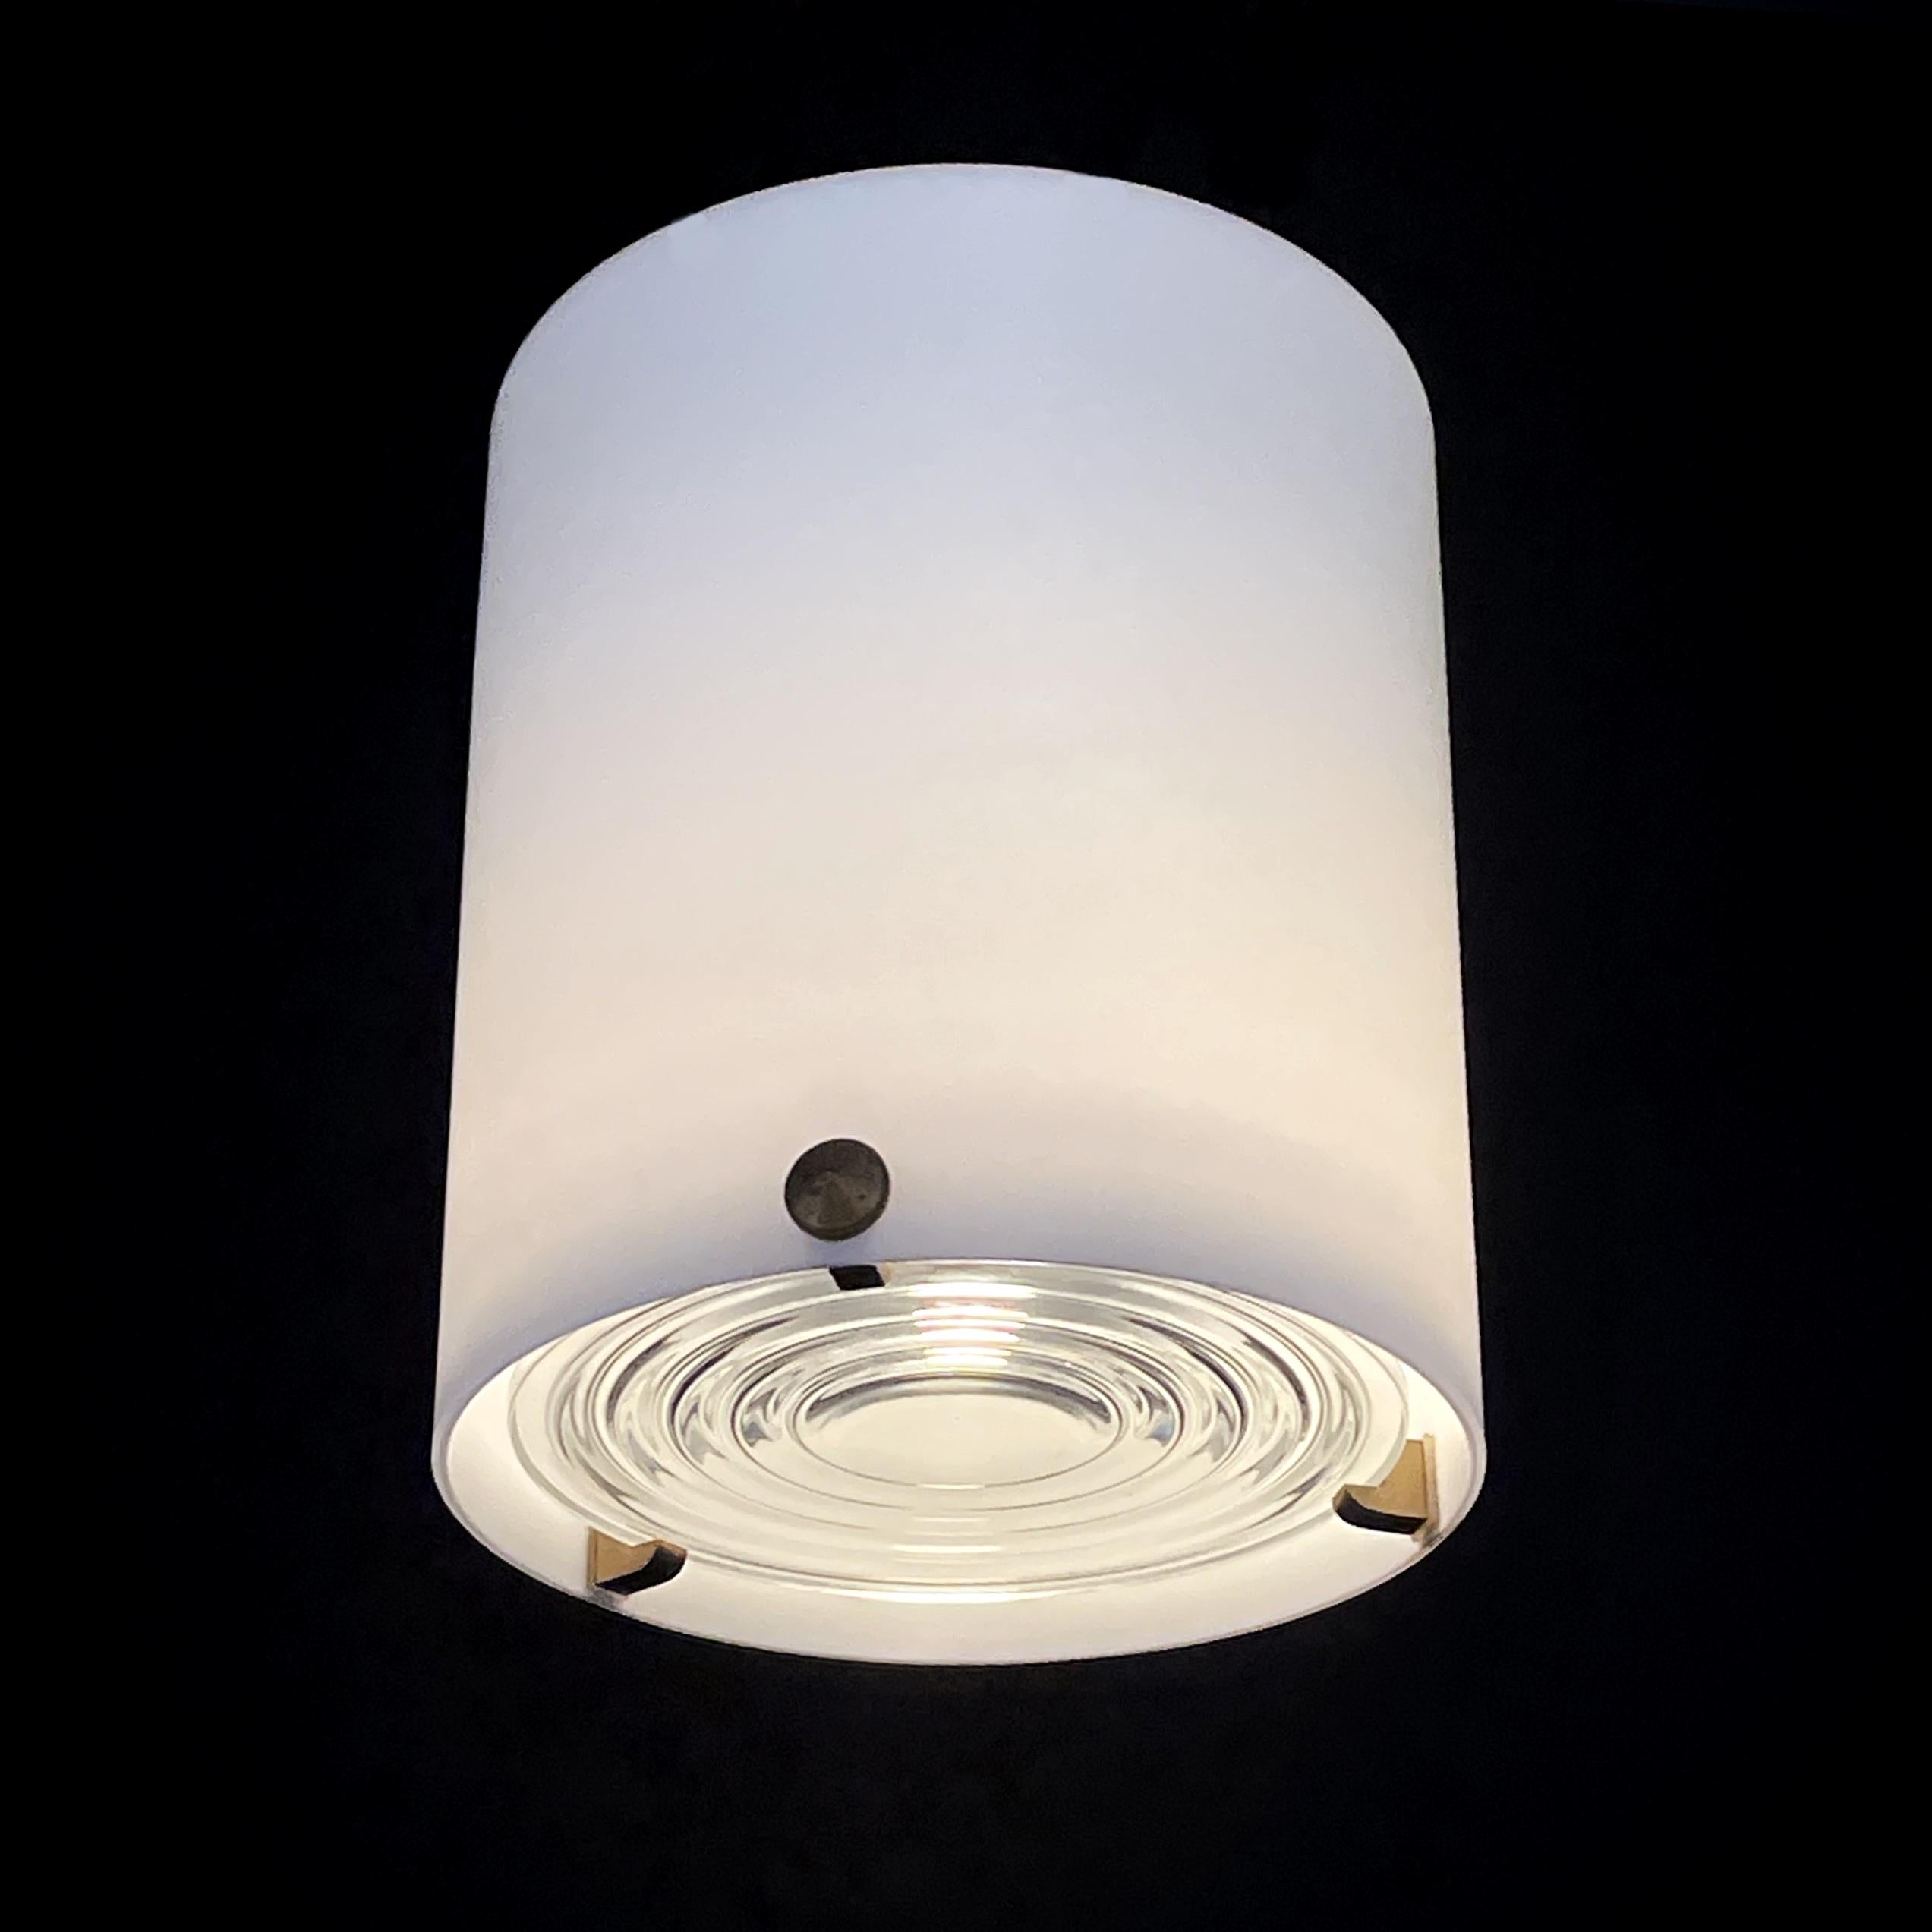 1 Jean PERZEL ceiling lamp model 2015A design 1950s

Ceiling lamp Jean Perzel combines timeless elegance and first-class functionality. Its characteristic design consists of a functional cylinder made of acid satin enameled glass. This high-quality